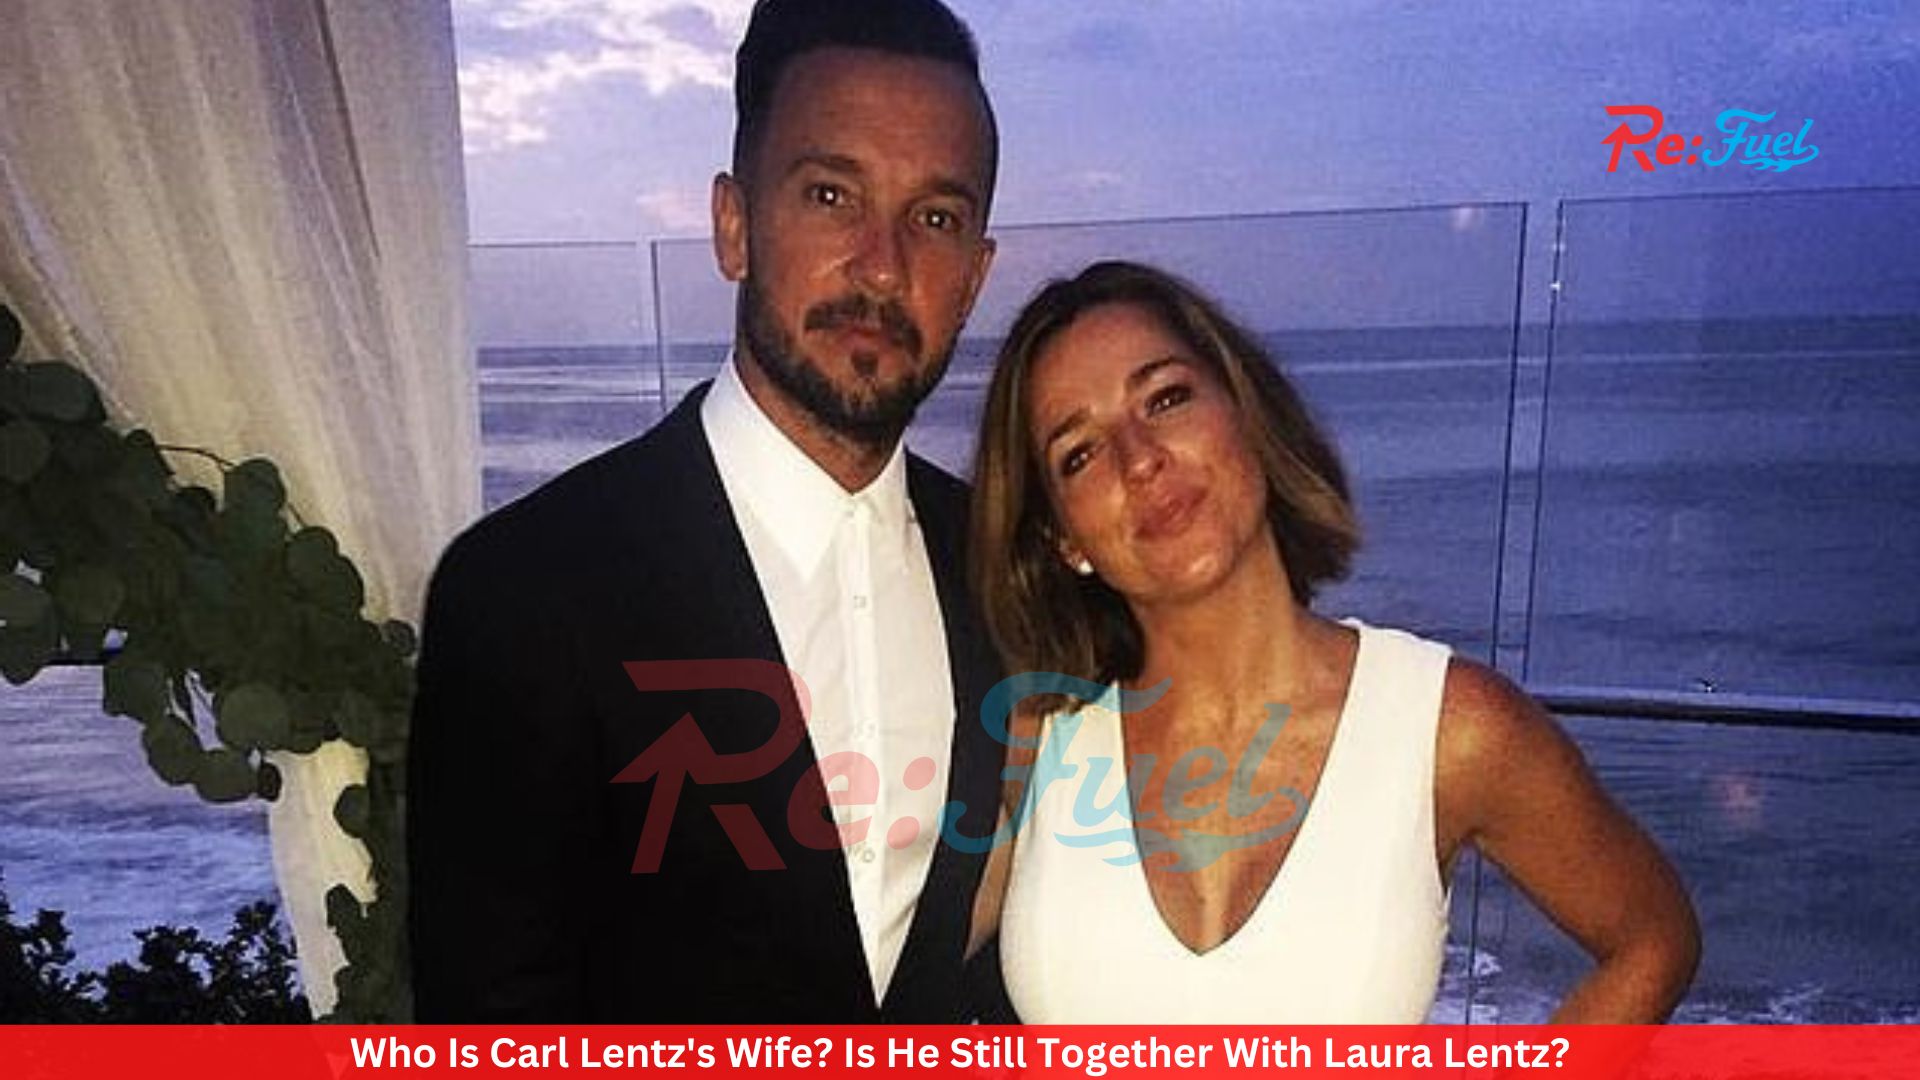 Who Is Carl Lentz's Wife? Is He Still Together With Laura Lentz?